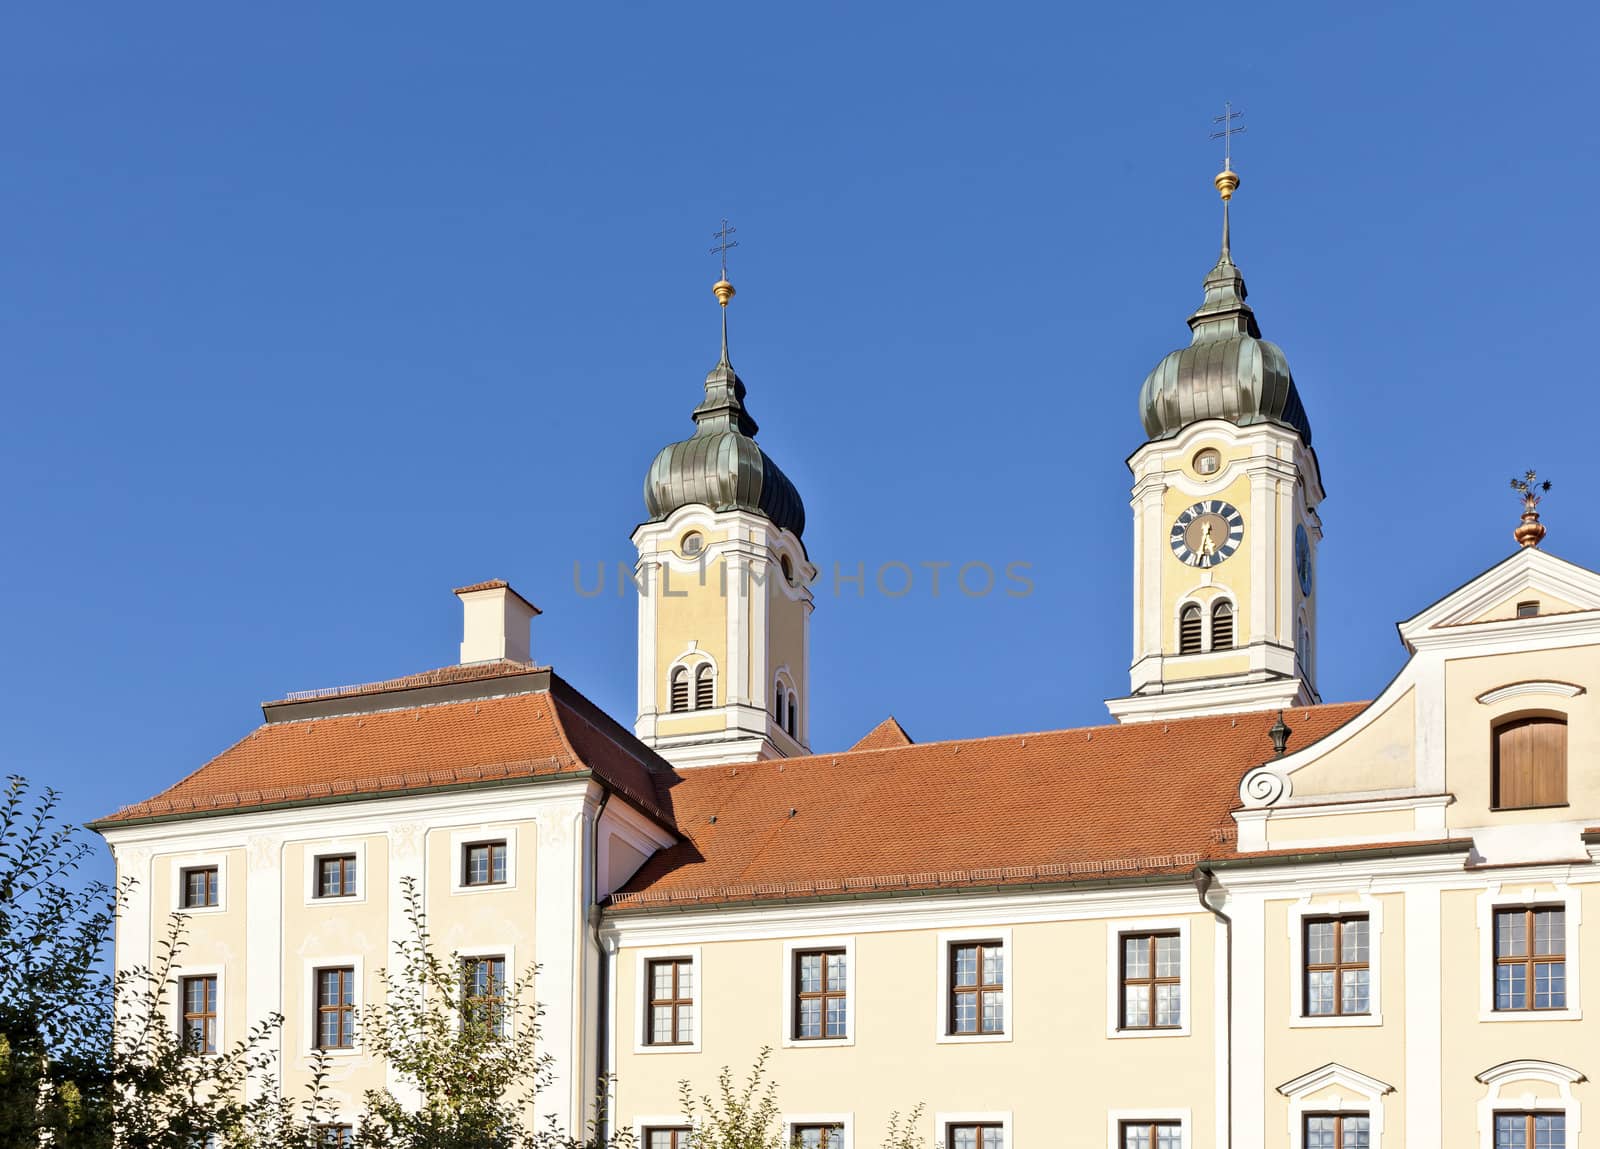 An image of the beautiful monastery in Roggenburg Bavaria Germany